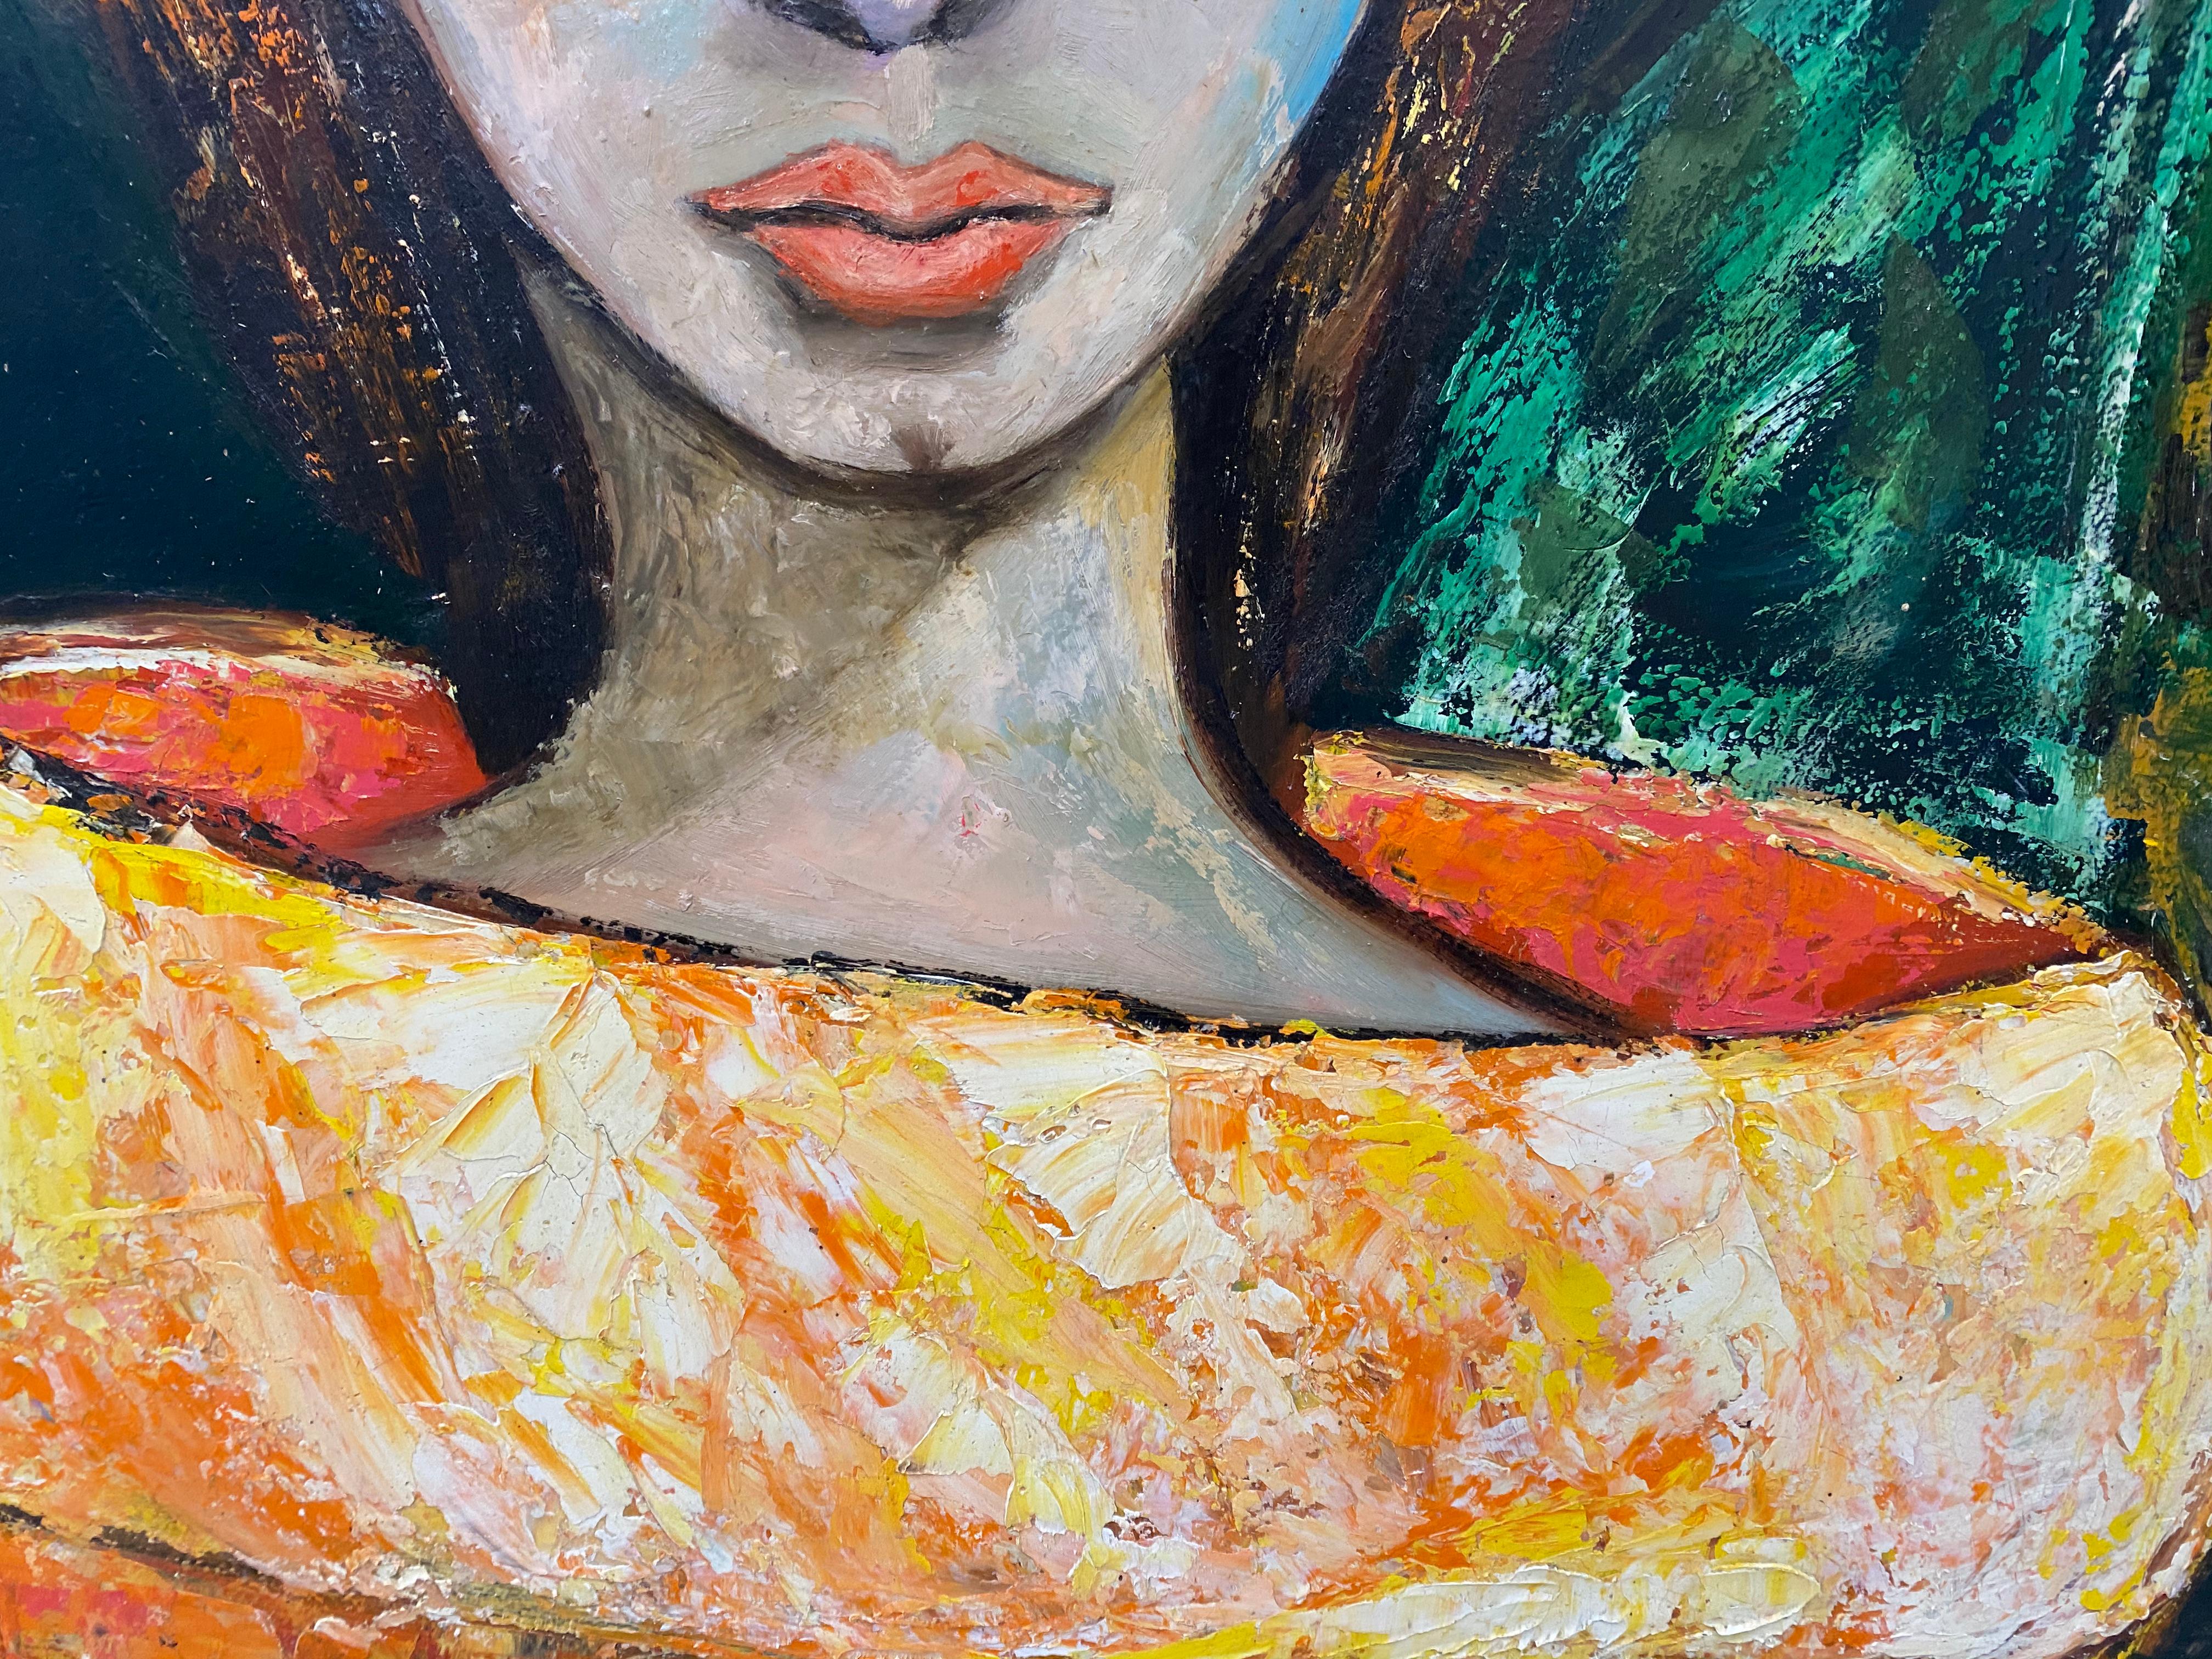 Mid 20th Century Oil Portrait of a Fashionable Young Woman by Barrow c.1970

Bright, bold and colorful painting - Classic vintage oil portrait

Original oil on masonite

Dimensions 24